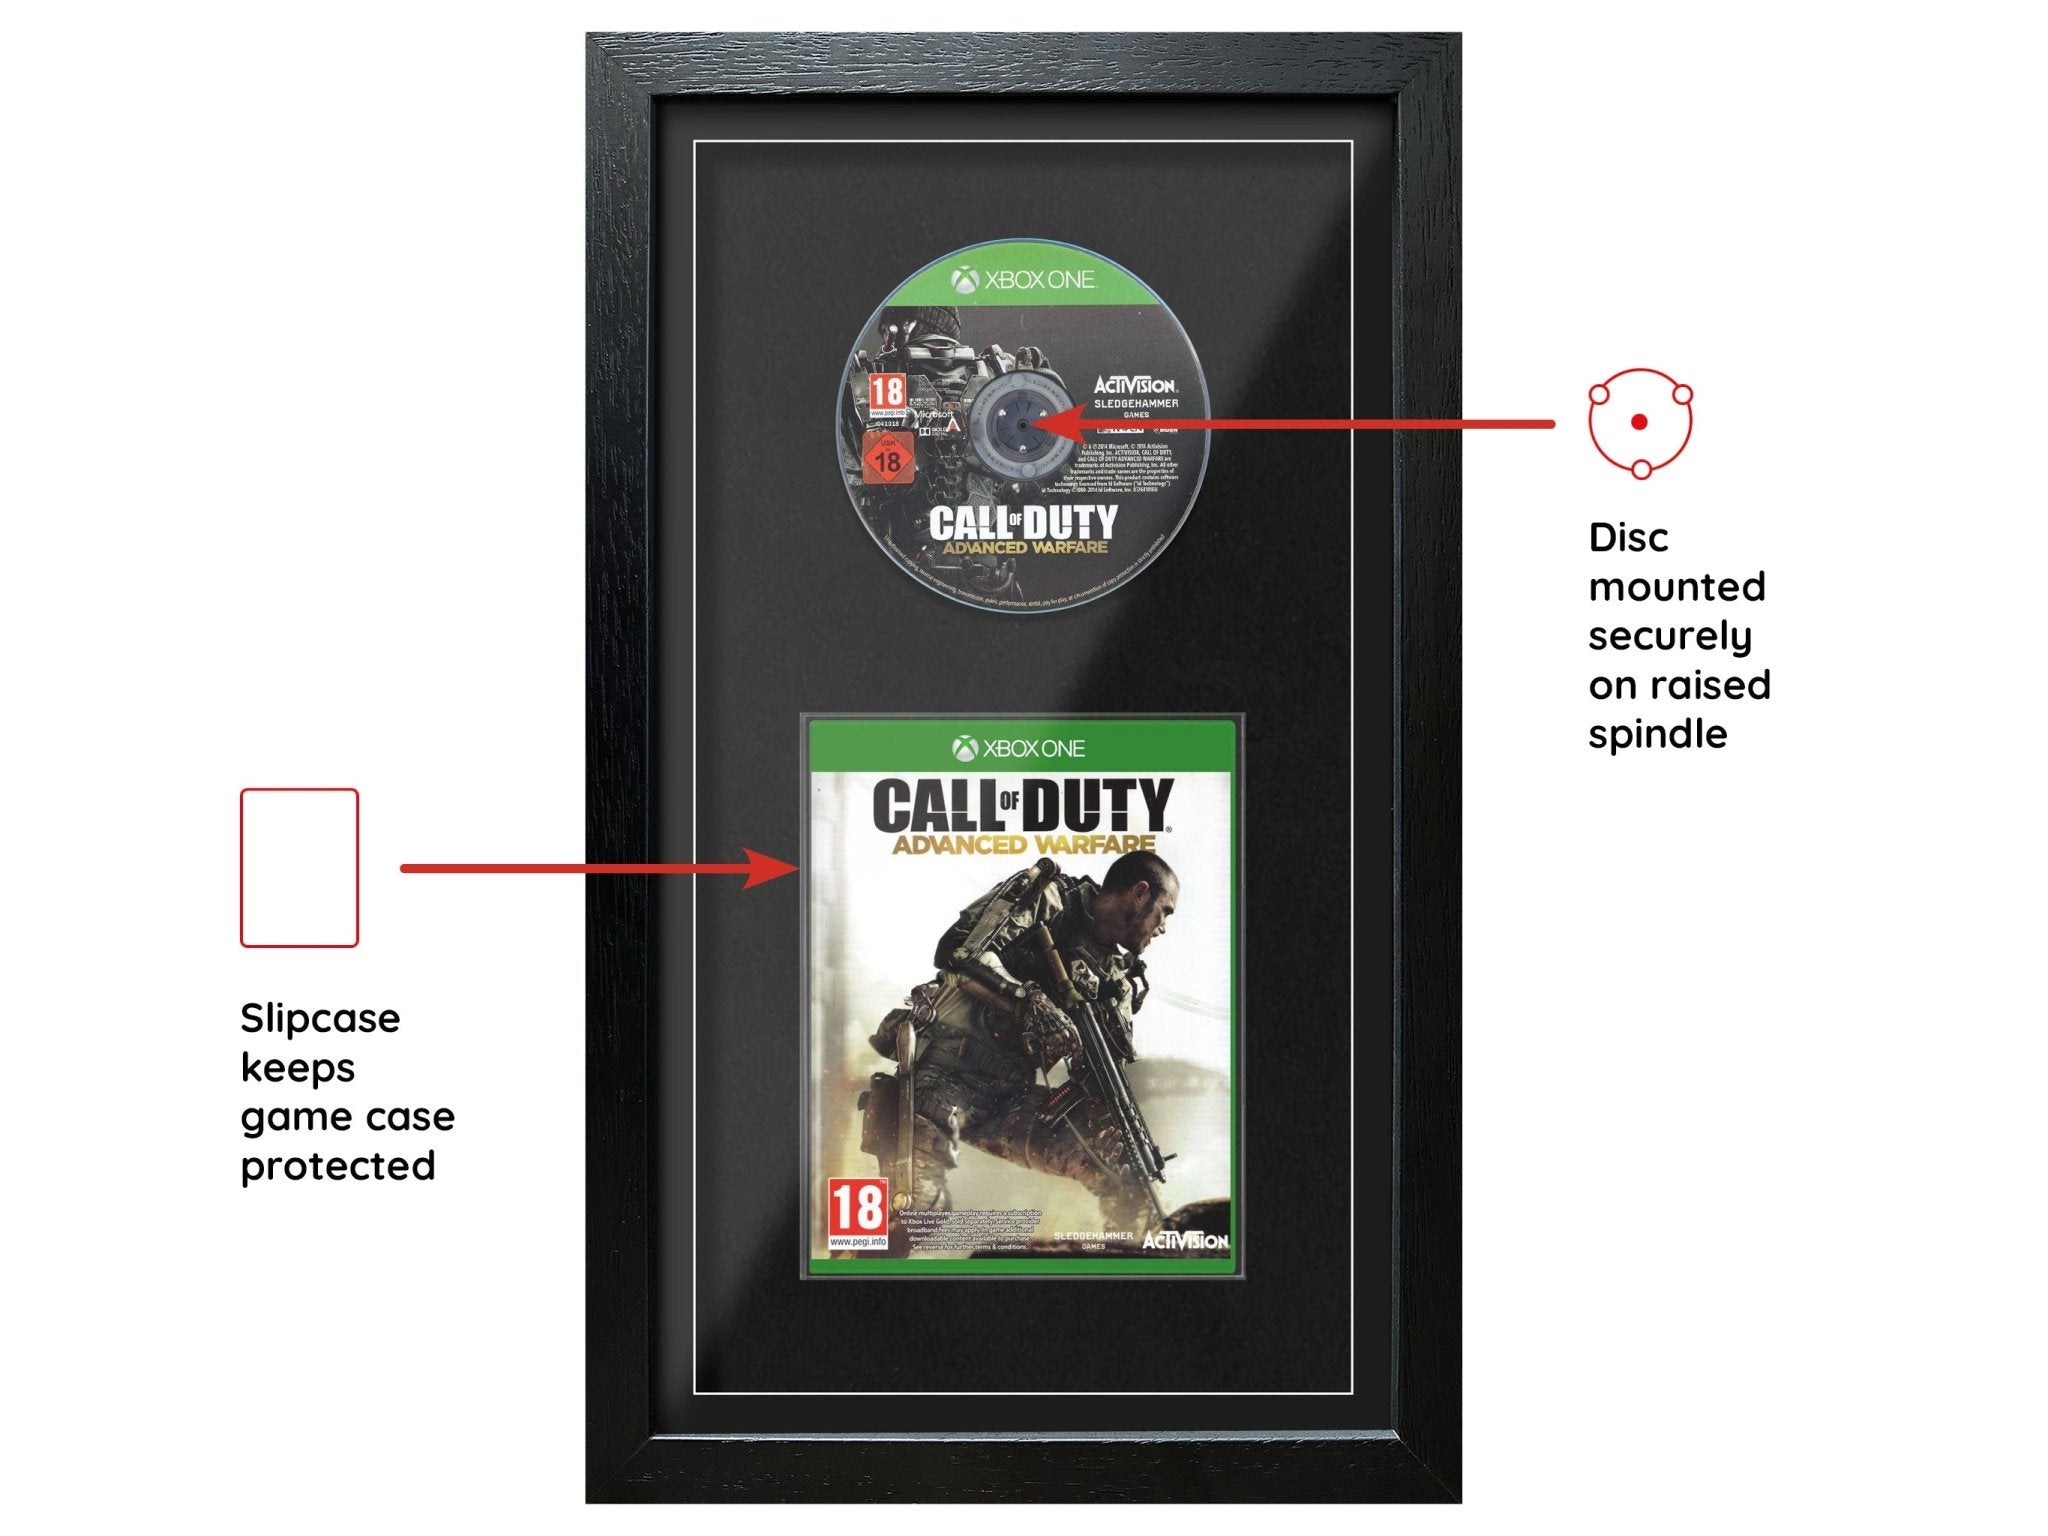 Call of Duty: Advanced Warfare (Xbox One) Exhibition Range Framed Game - Frame-A-Game